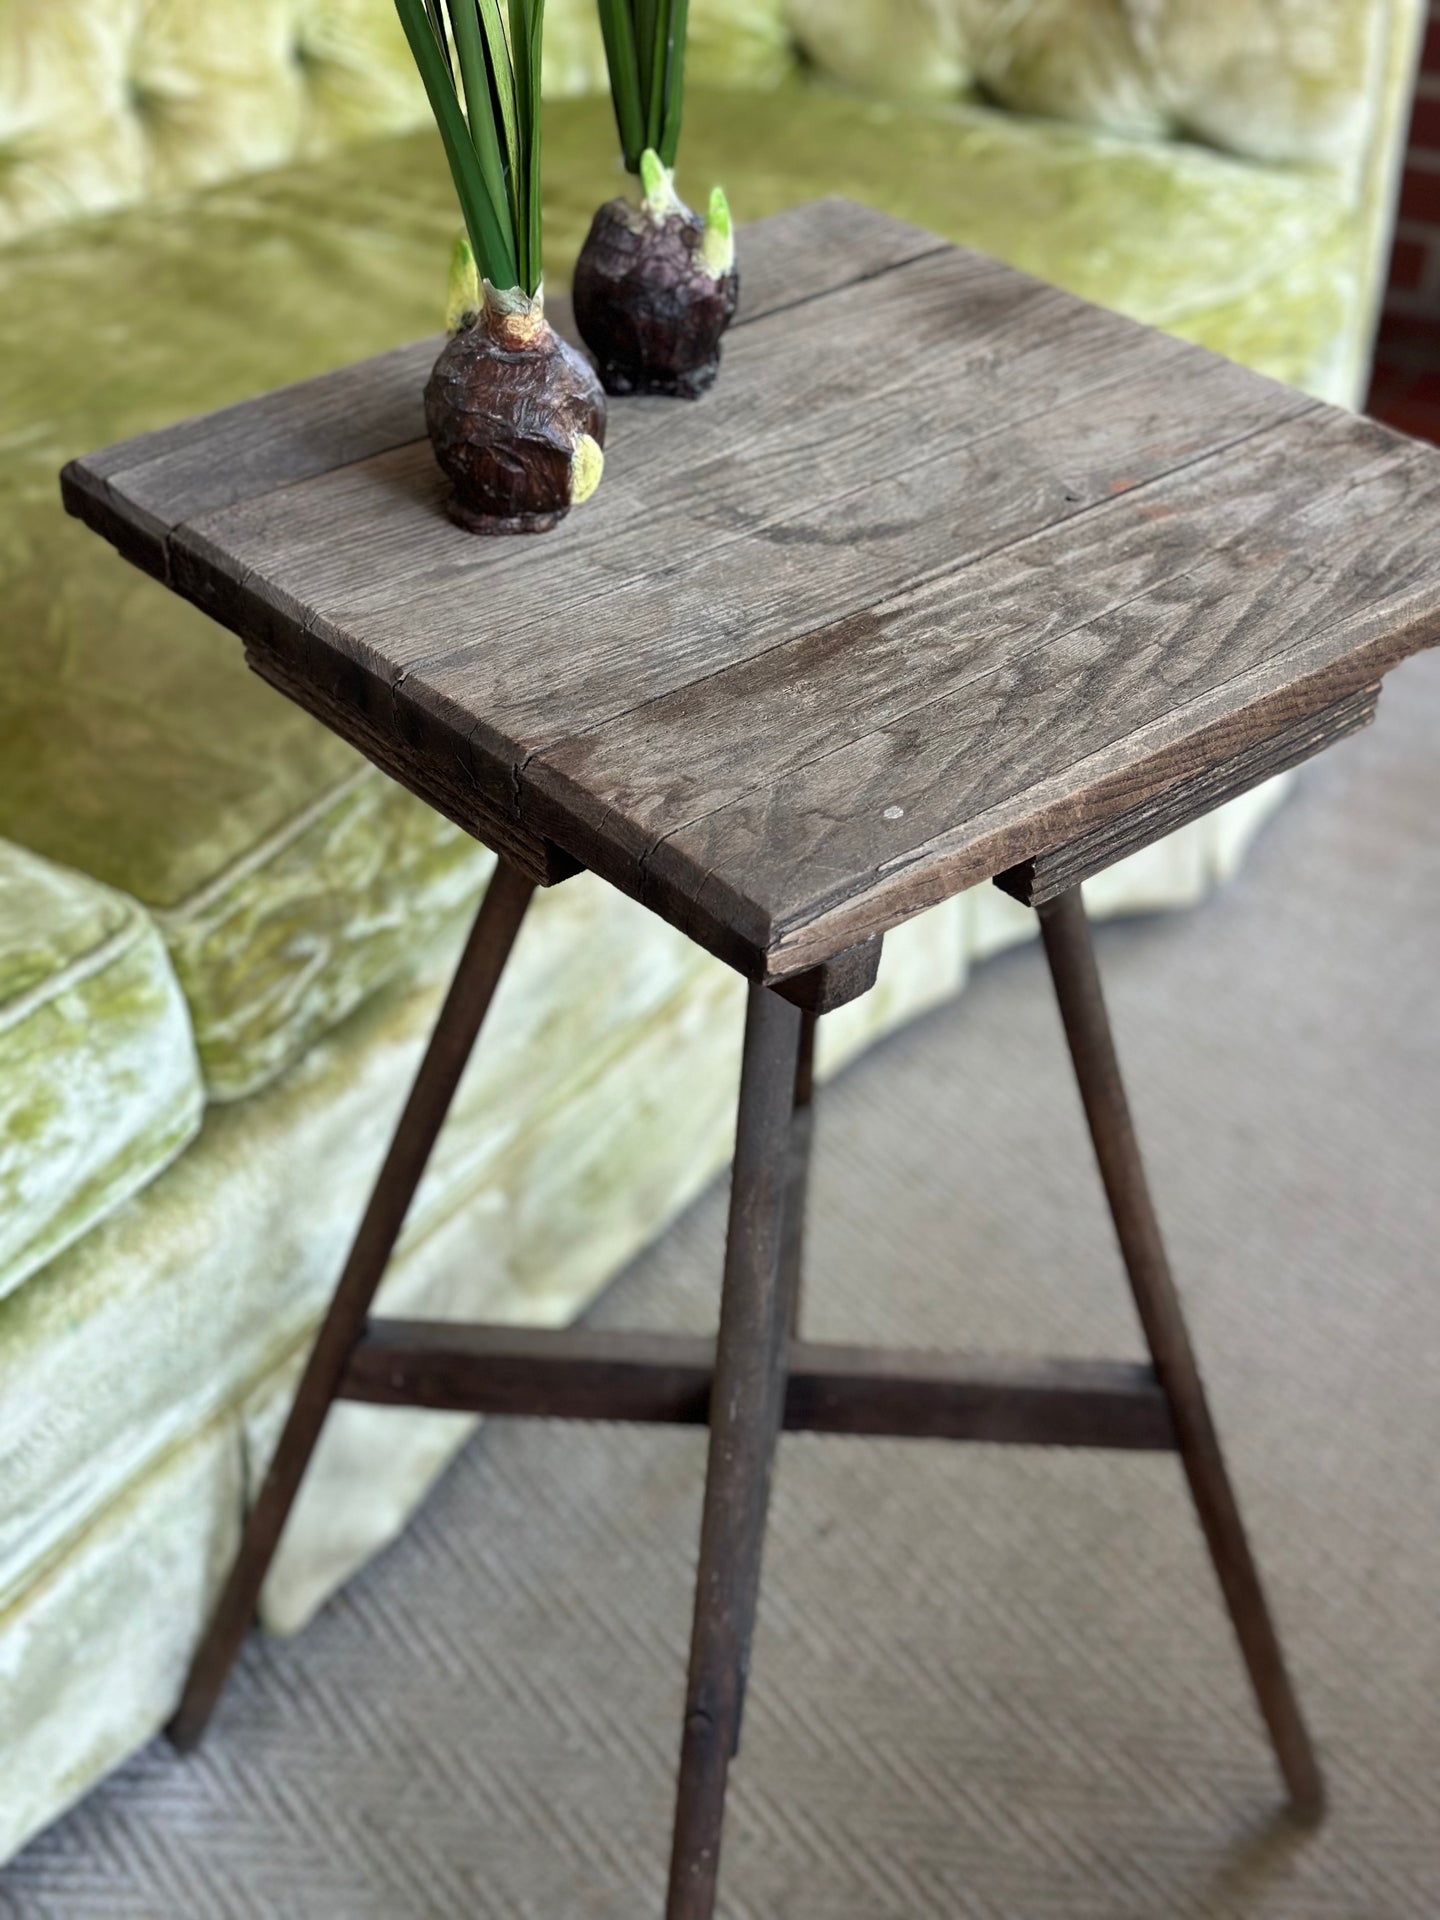 Primitive Stand/Table